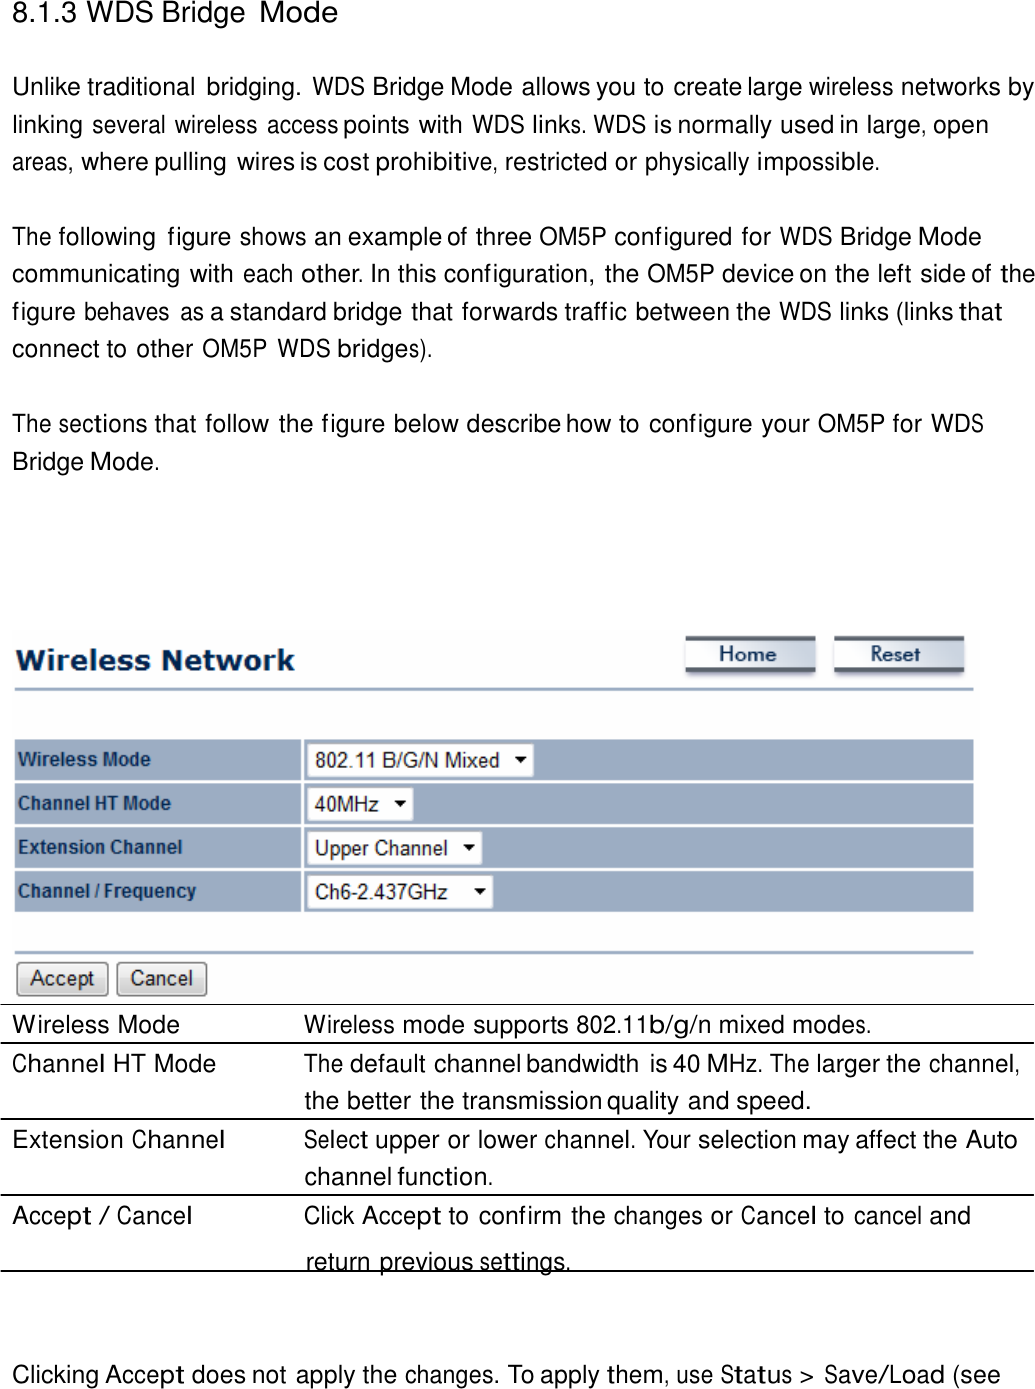  8.1.3 WDS Bridge Mode   Unlike traditional  bridging. WDS Bridge Mode allows you to create large wireless networks by linking several wireless access points with WDS links. WDS is normally used in large, open areas, where pulling wires is cost prohibitive, restricted or physically impossible.   The following  figure shows an example of three OM5P configured for WDS Bridge Mode communicating with each other. In this configuration, the OM5P device on the left side of the figure behaves  as a standard bridge that forwards traffic between the WDS links (links that connect to other OM5P WDS bridges).  The sections that follow the figure below describe how to configure your OM5P for WDS Bridge Mode.                           Wireless Mode  Wireless mode supports 802.11b/g/n mixed modes. Channel HT Mode  The default channel bandwidth is 40 MHz. The larger the channel, the better the transmission quality and speed. Extension Channel Select upper or lower channel. Your selection may affect the Auto channel function. Accept / Cancel Click Accept to confirm the changes or Cancel to cancel and return previous settings.     Clicking Accept does not apply the changes. To apply them, use Status &gt; Save/Load (see 